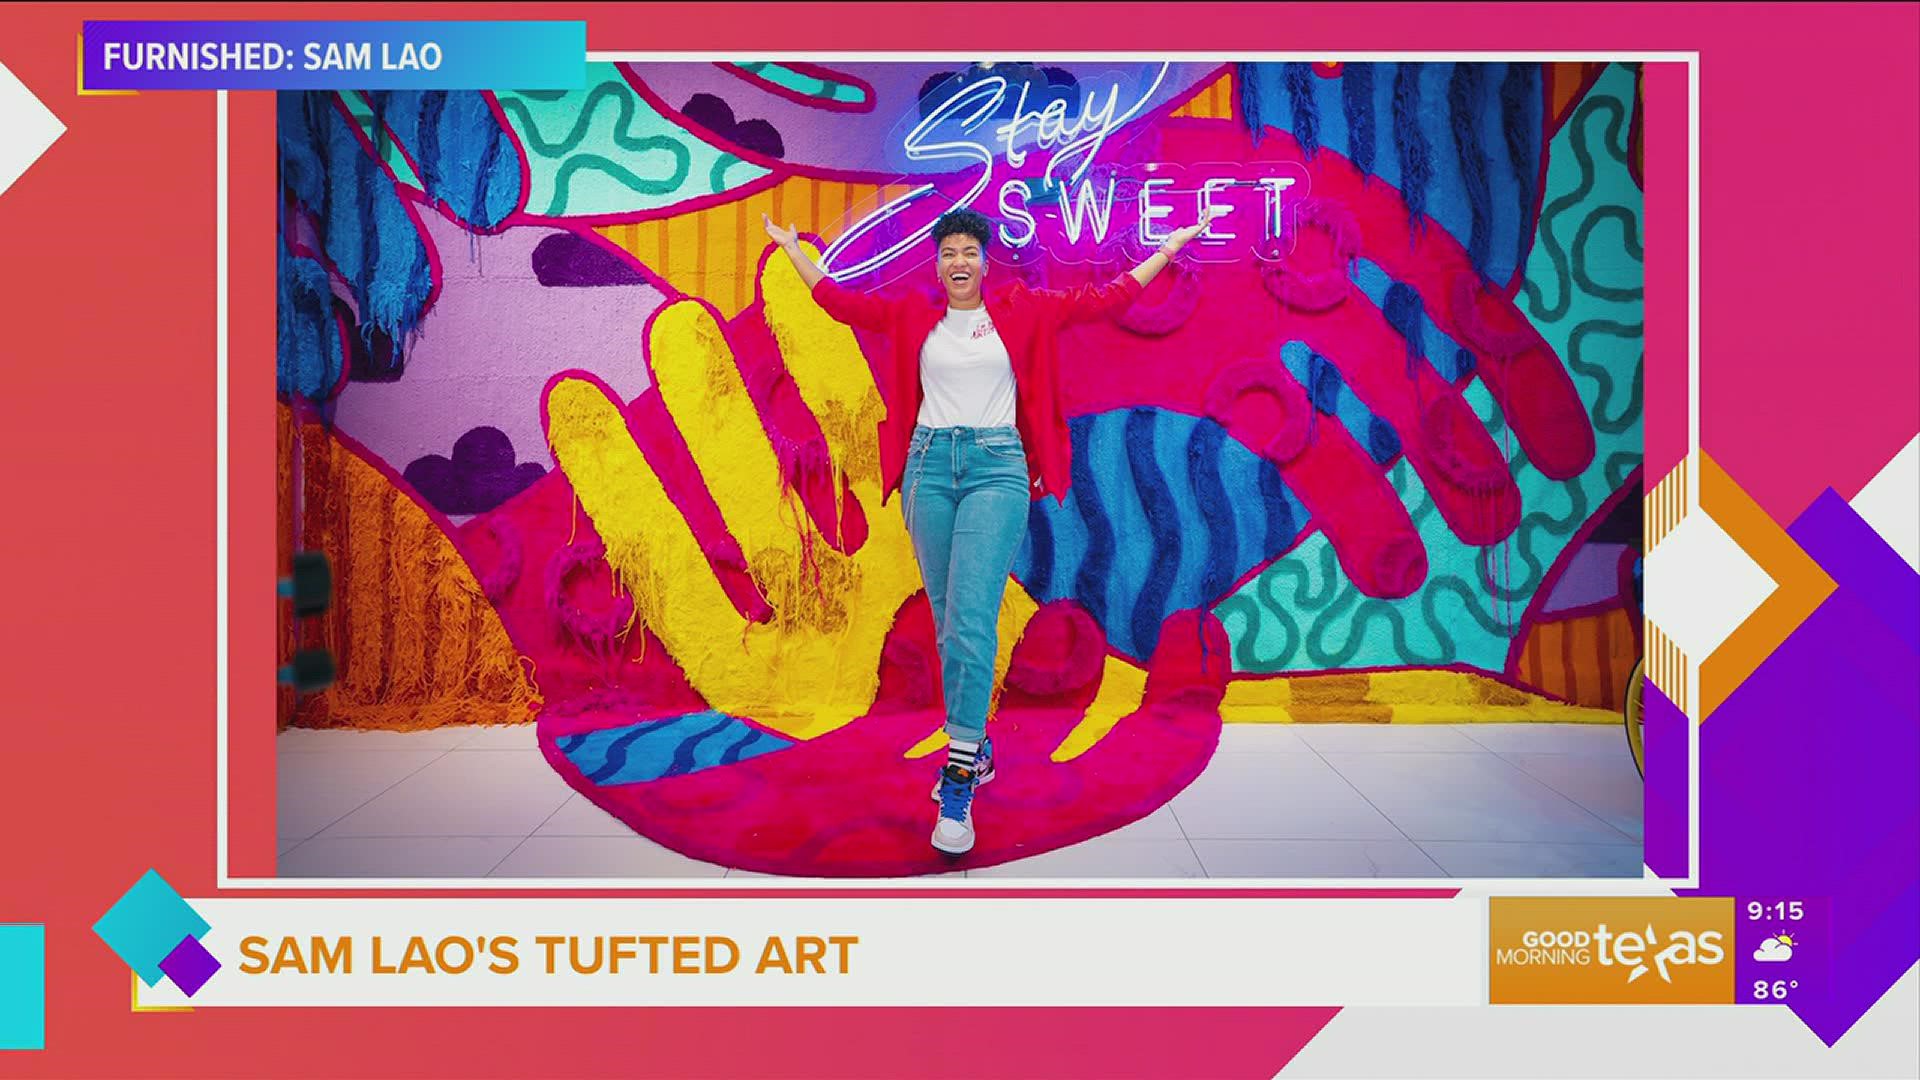 She adds texture to every color in the rainbow and her work has been featured around the city. Now you have a chance to get a closer look at the Sweet Tooth Hotel.